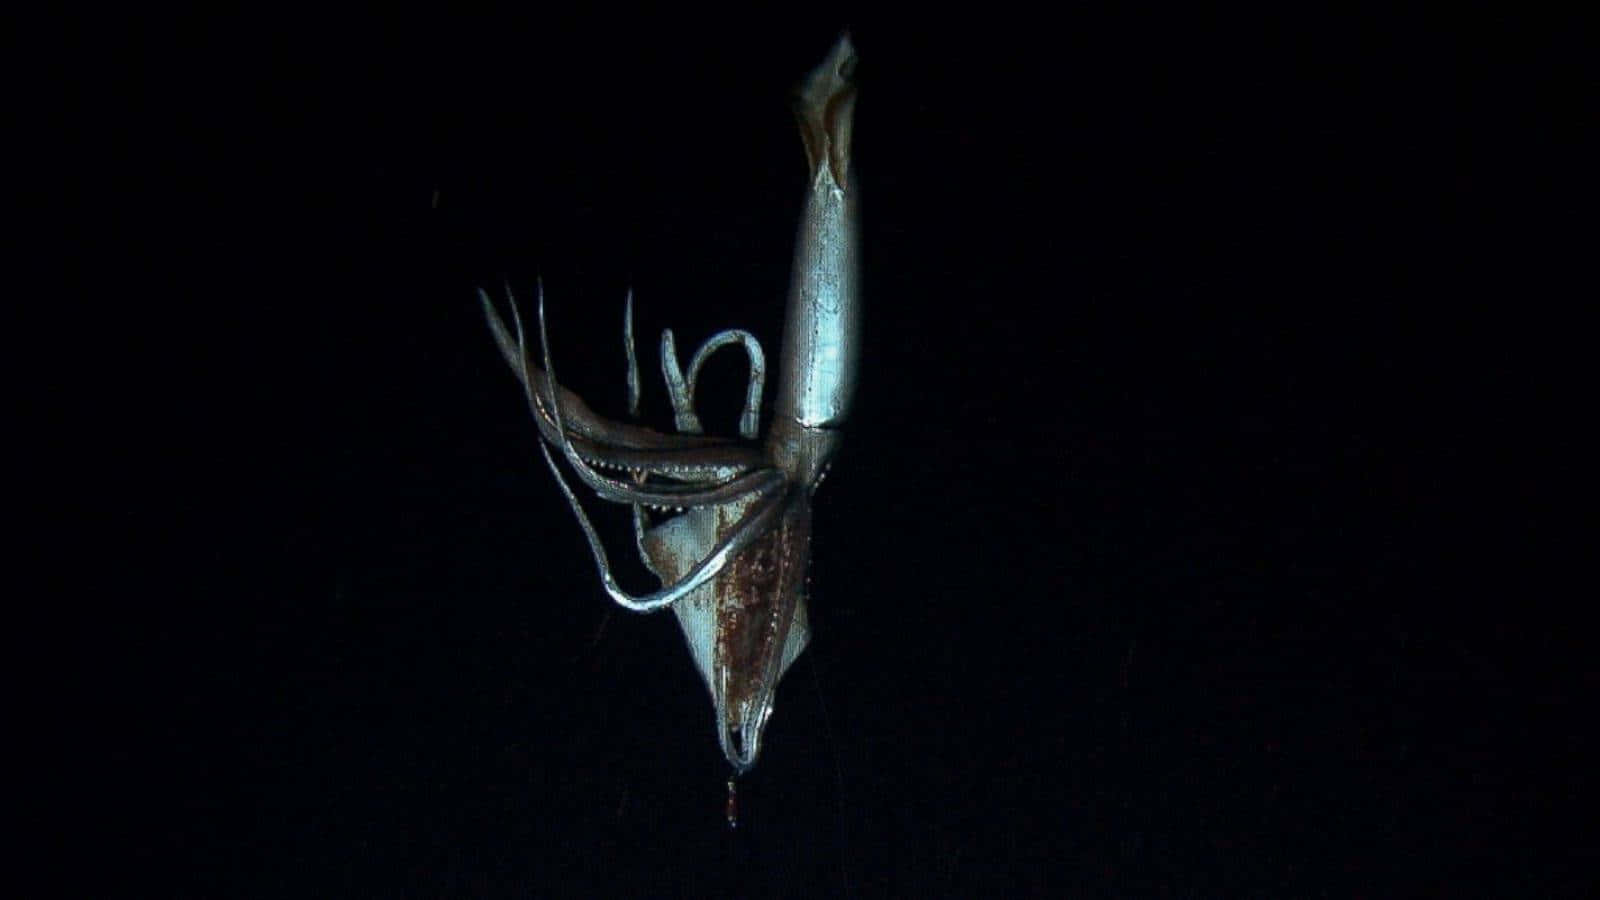 The Giant Squid, a mysterious and gargantuan sea creature